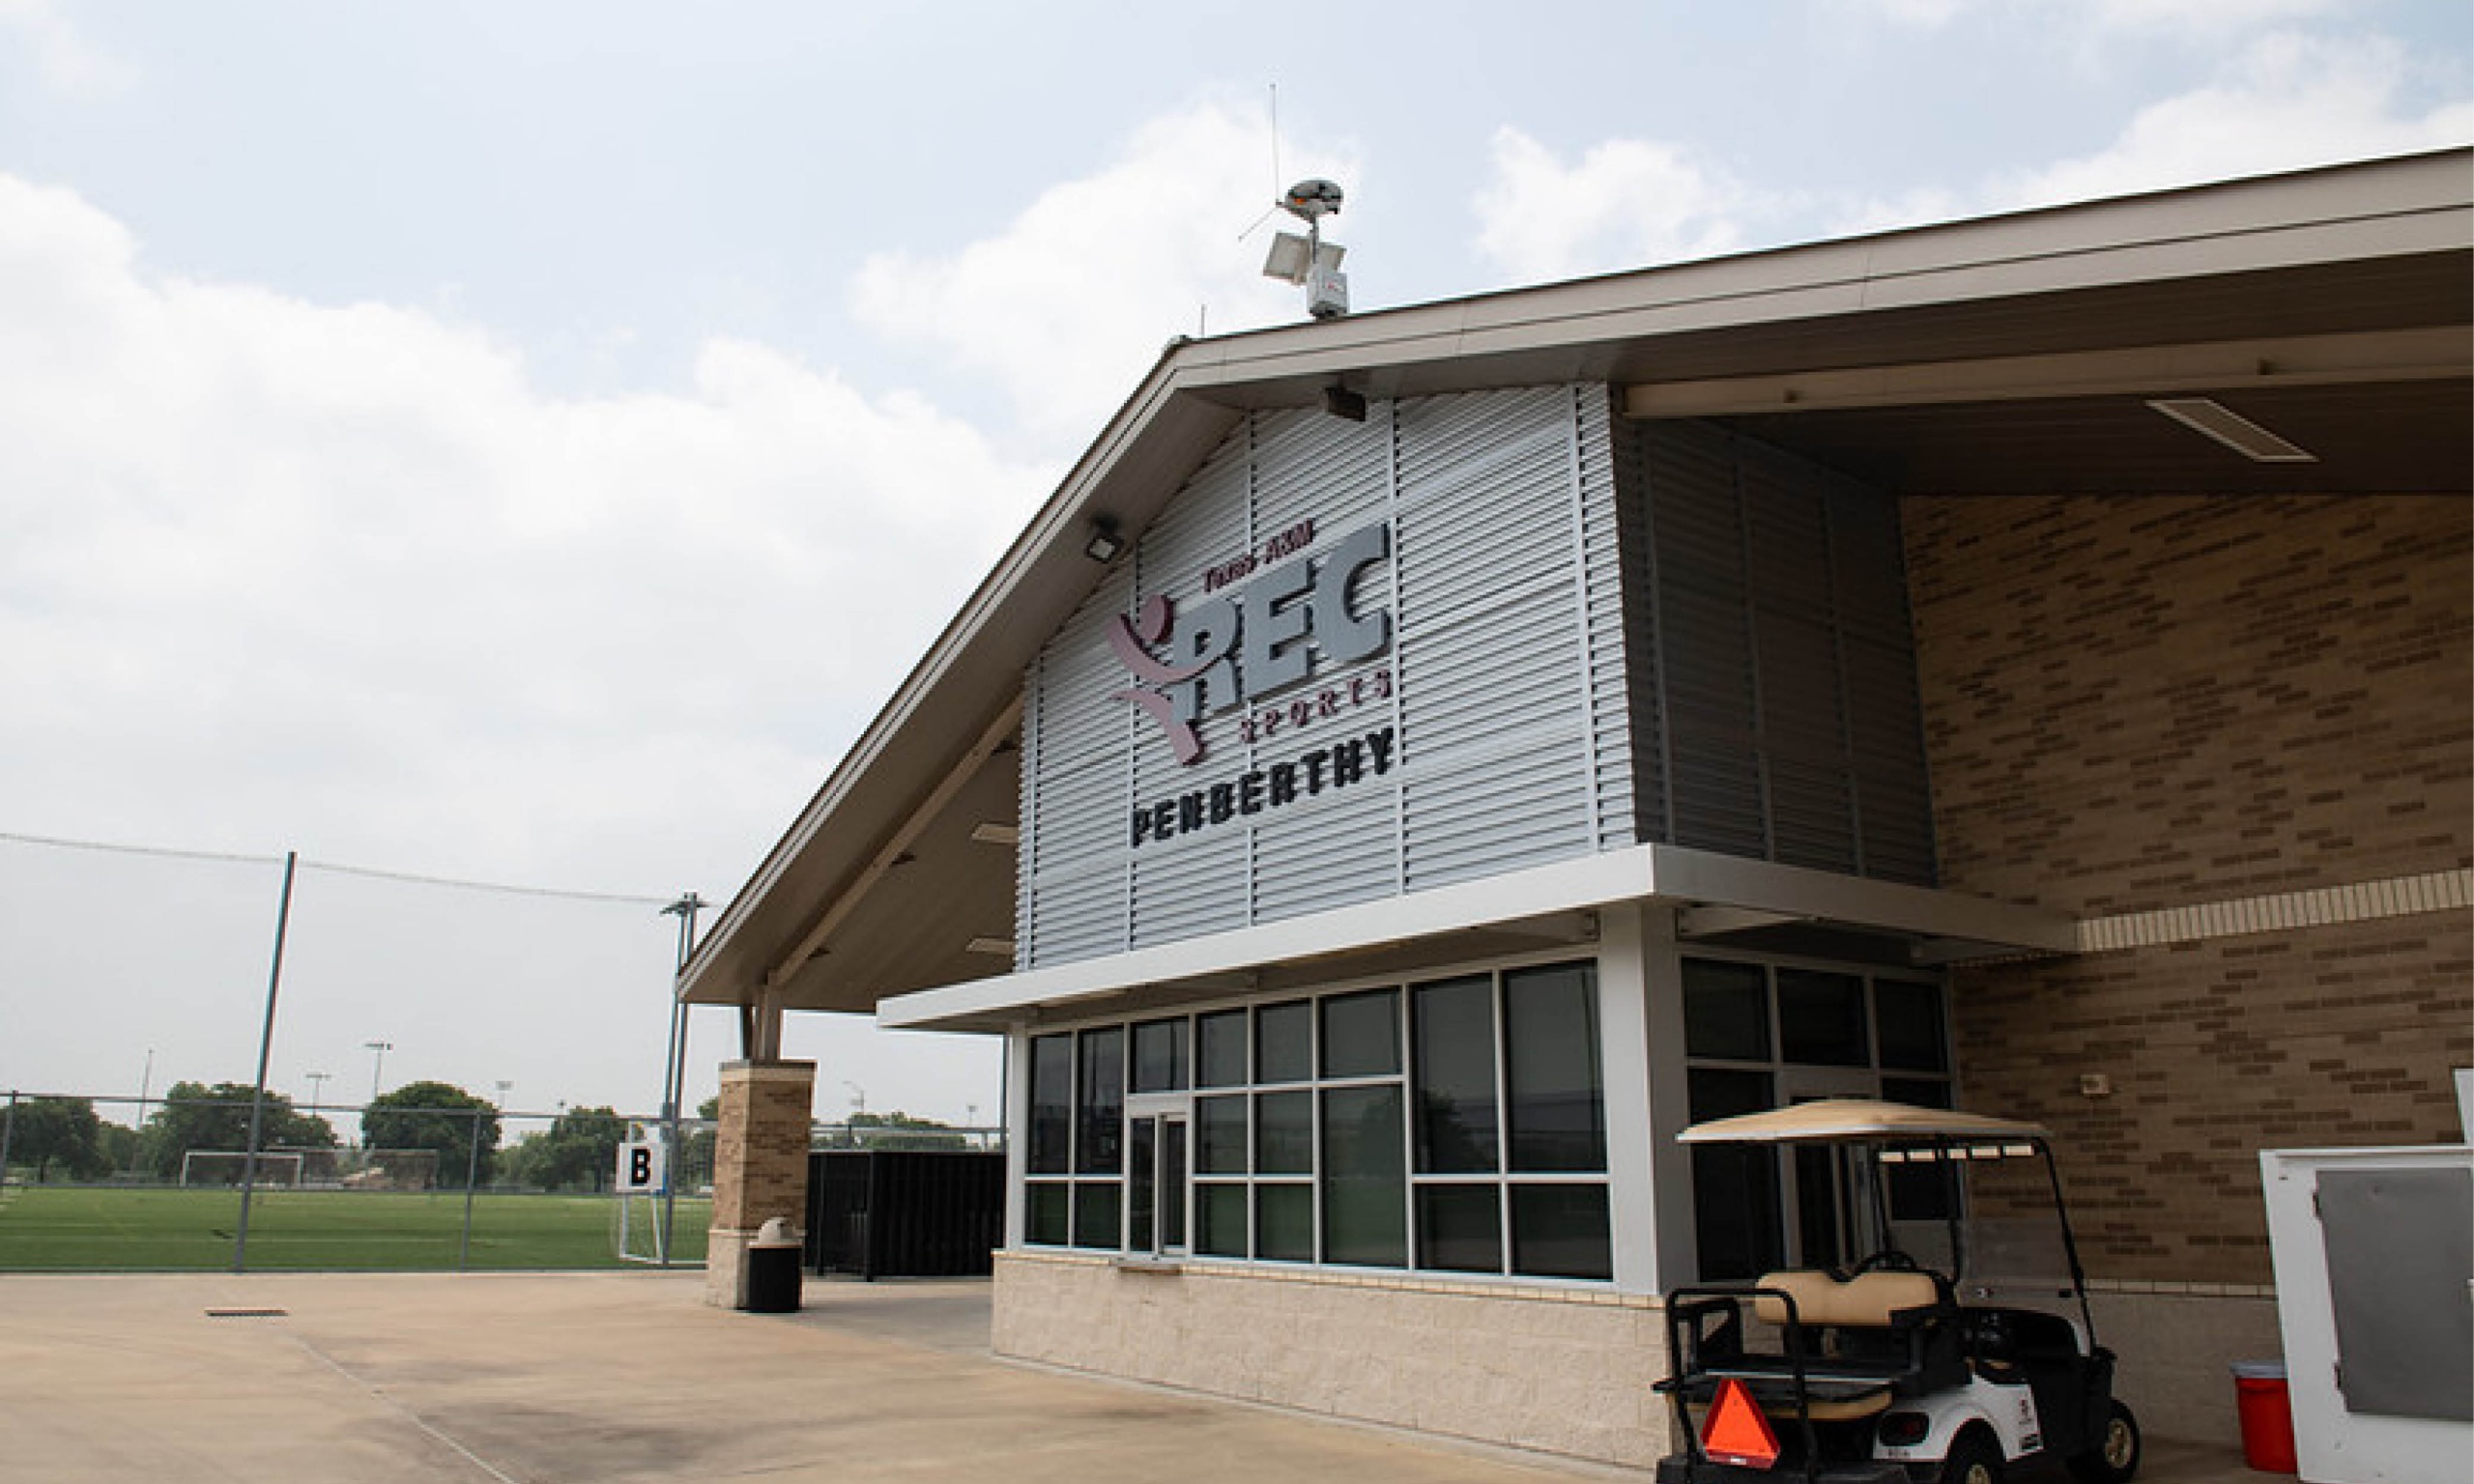 The main building at the Penberthy Rec Sports Complex, indicating its purpose or name, providing clear identification and information.